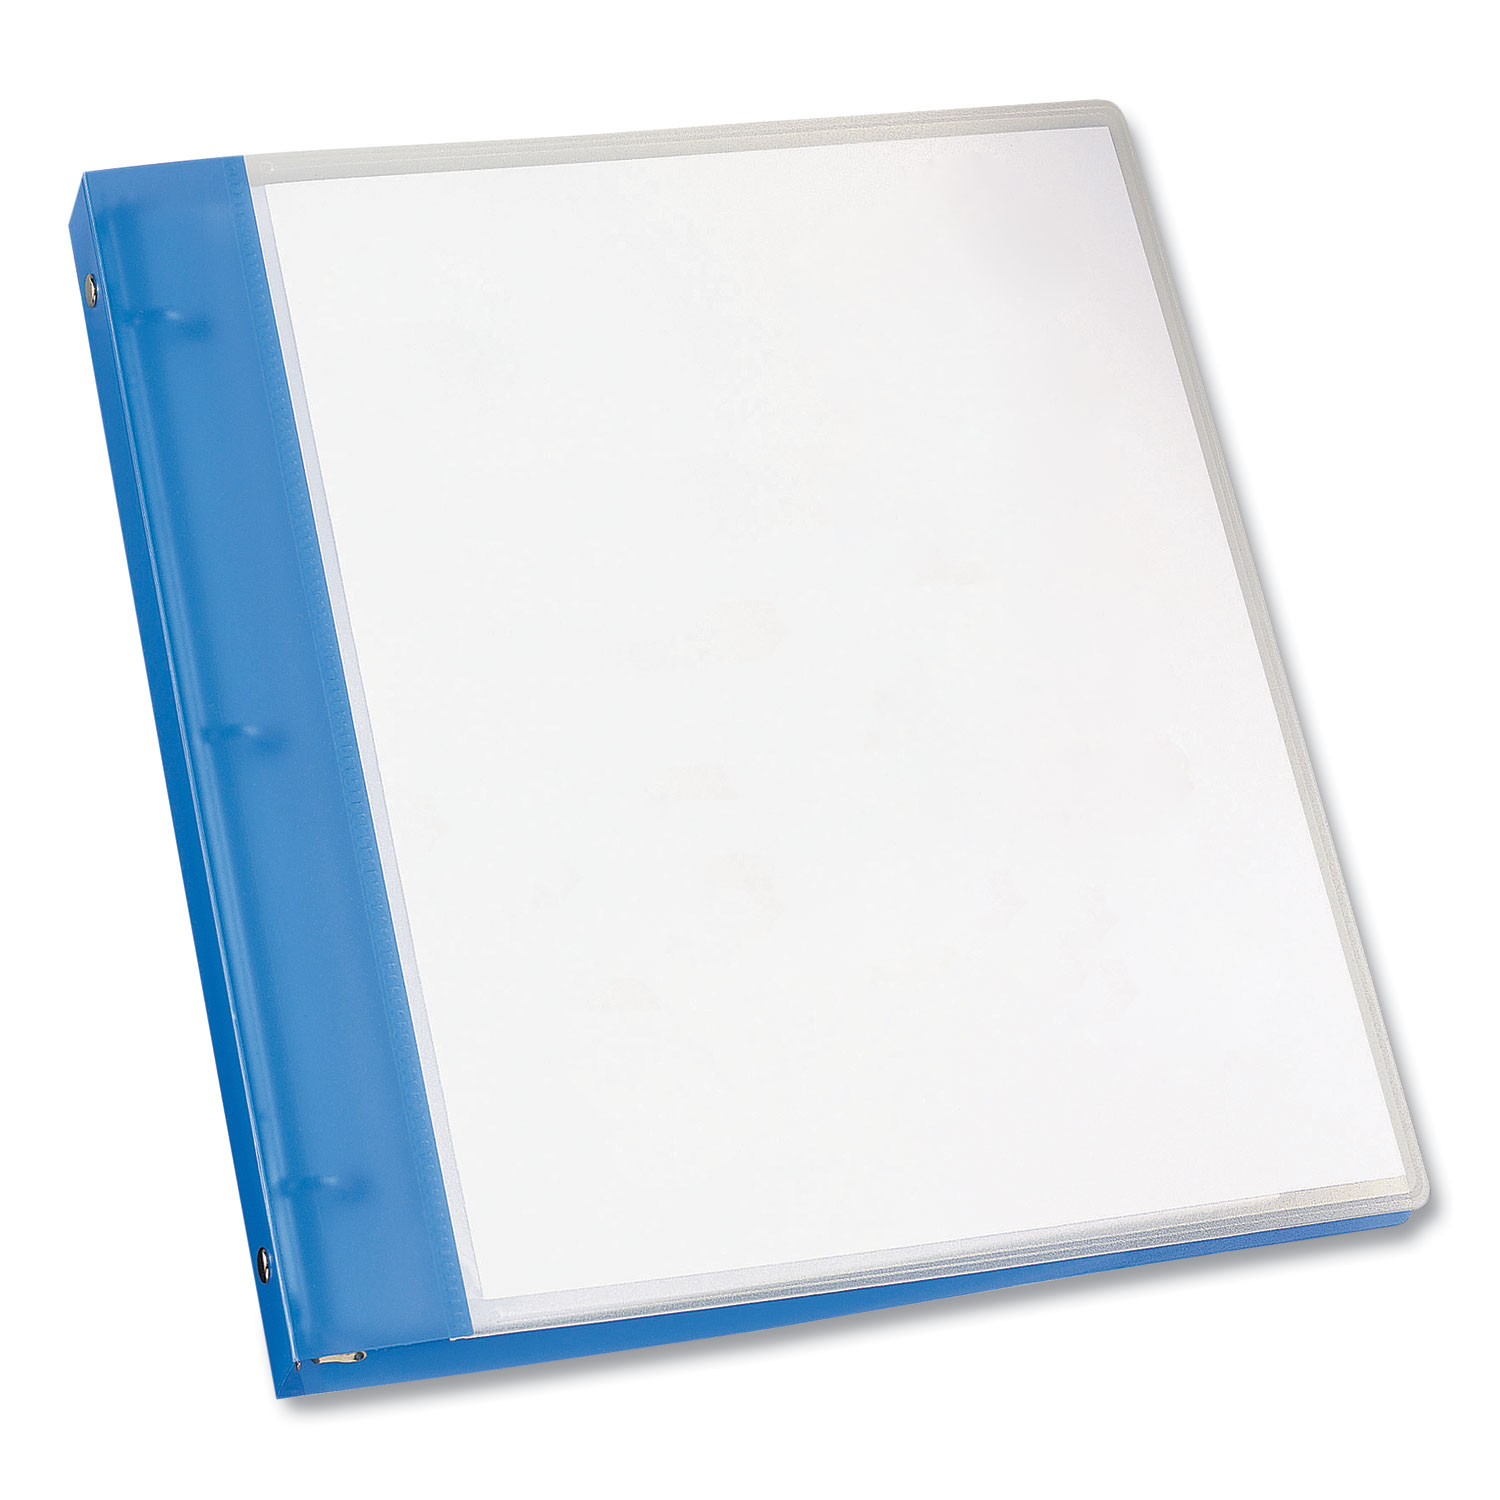 Avery Consumer Products Flexible Presentation Binder- View Pocket